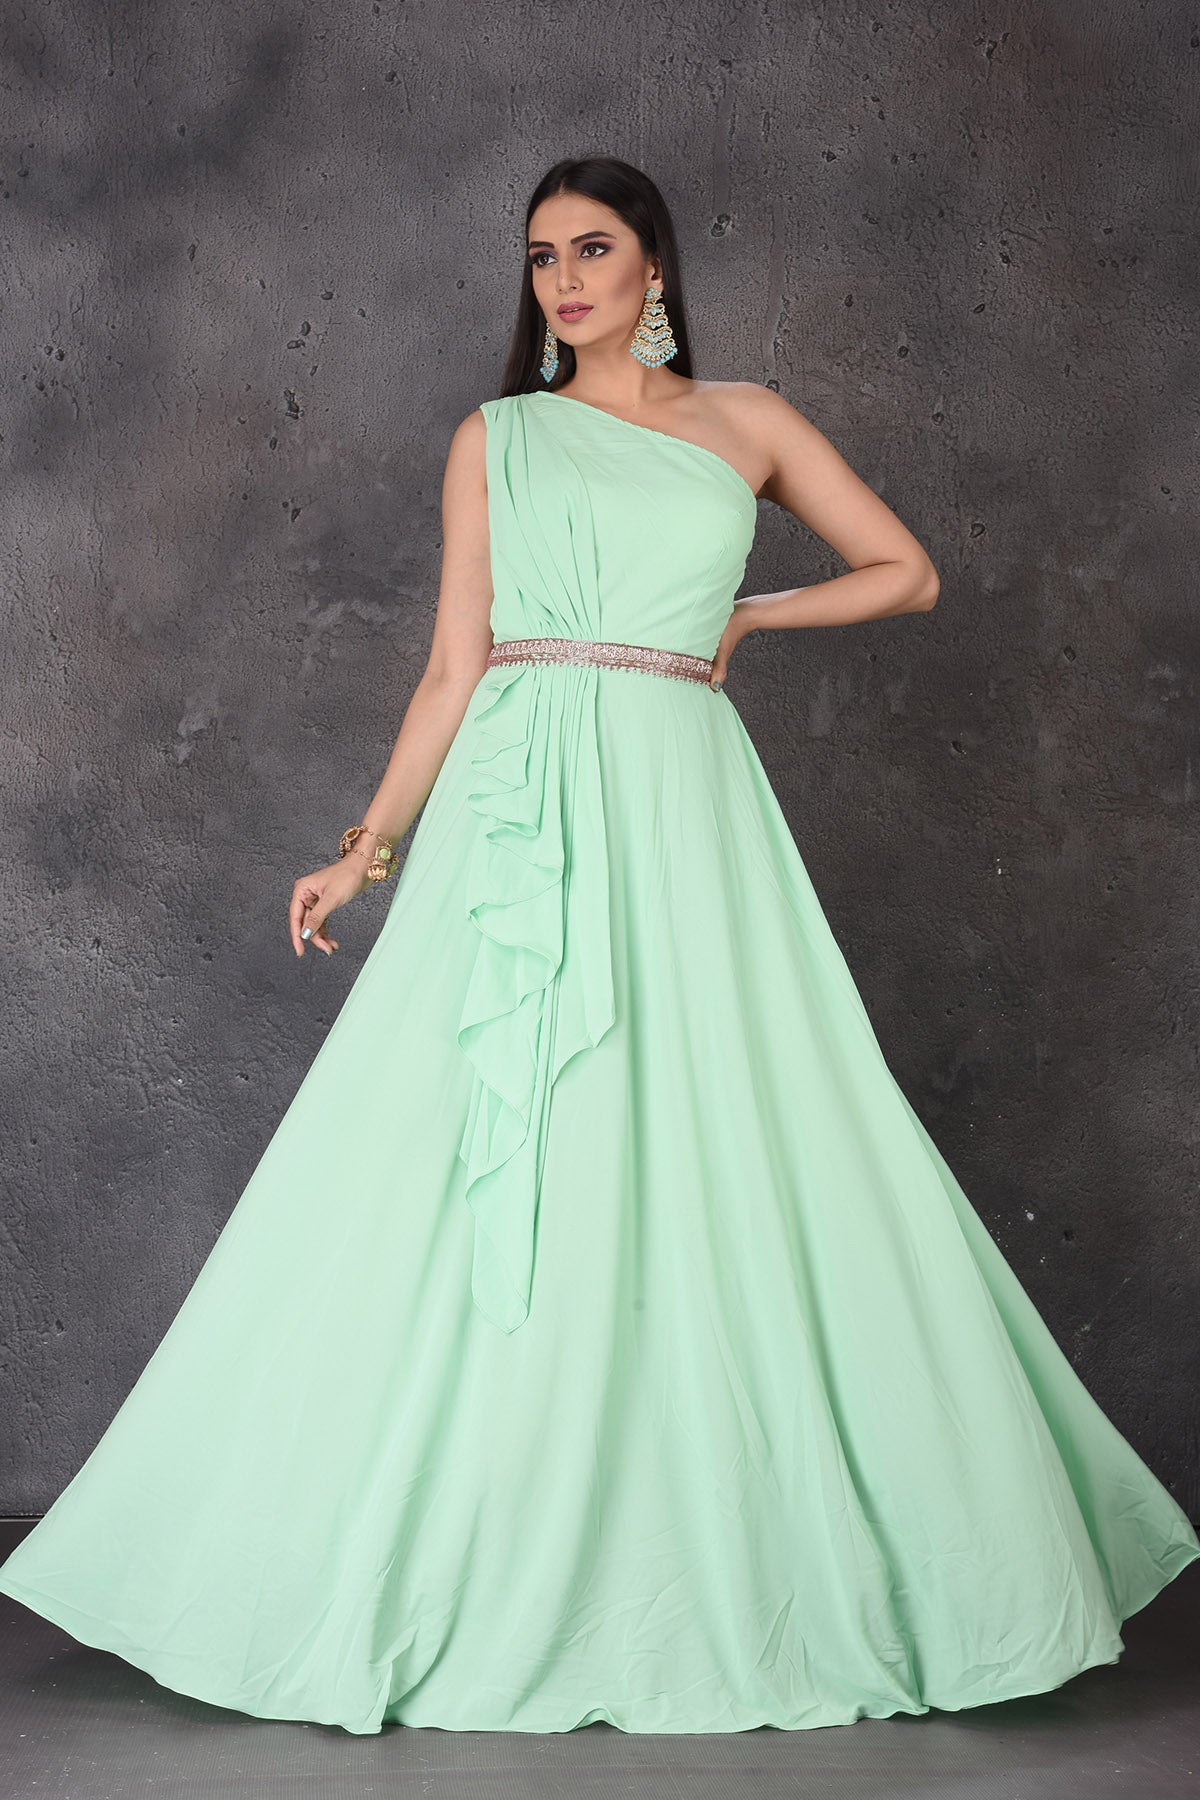 Buy Designer & Party Gowns for Women Online in India | Gown dress design,  Bridal dress fashion, Gowns